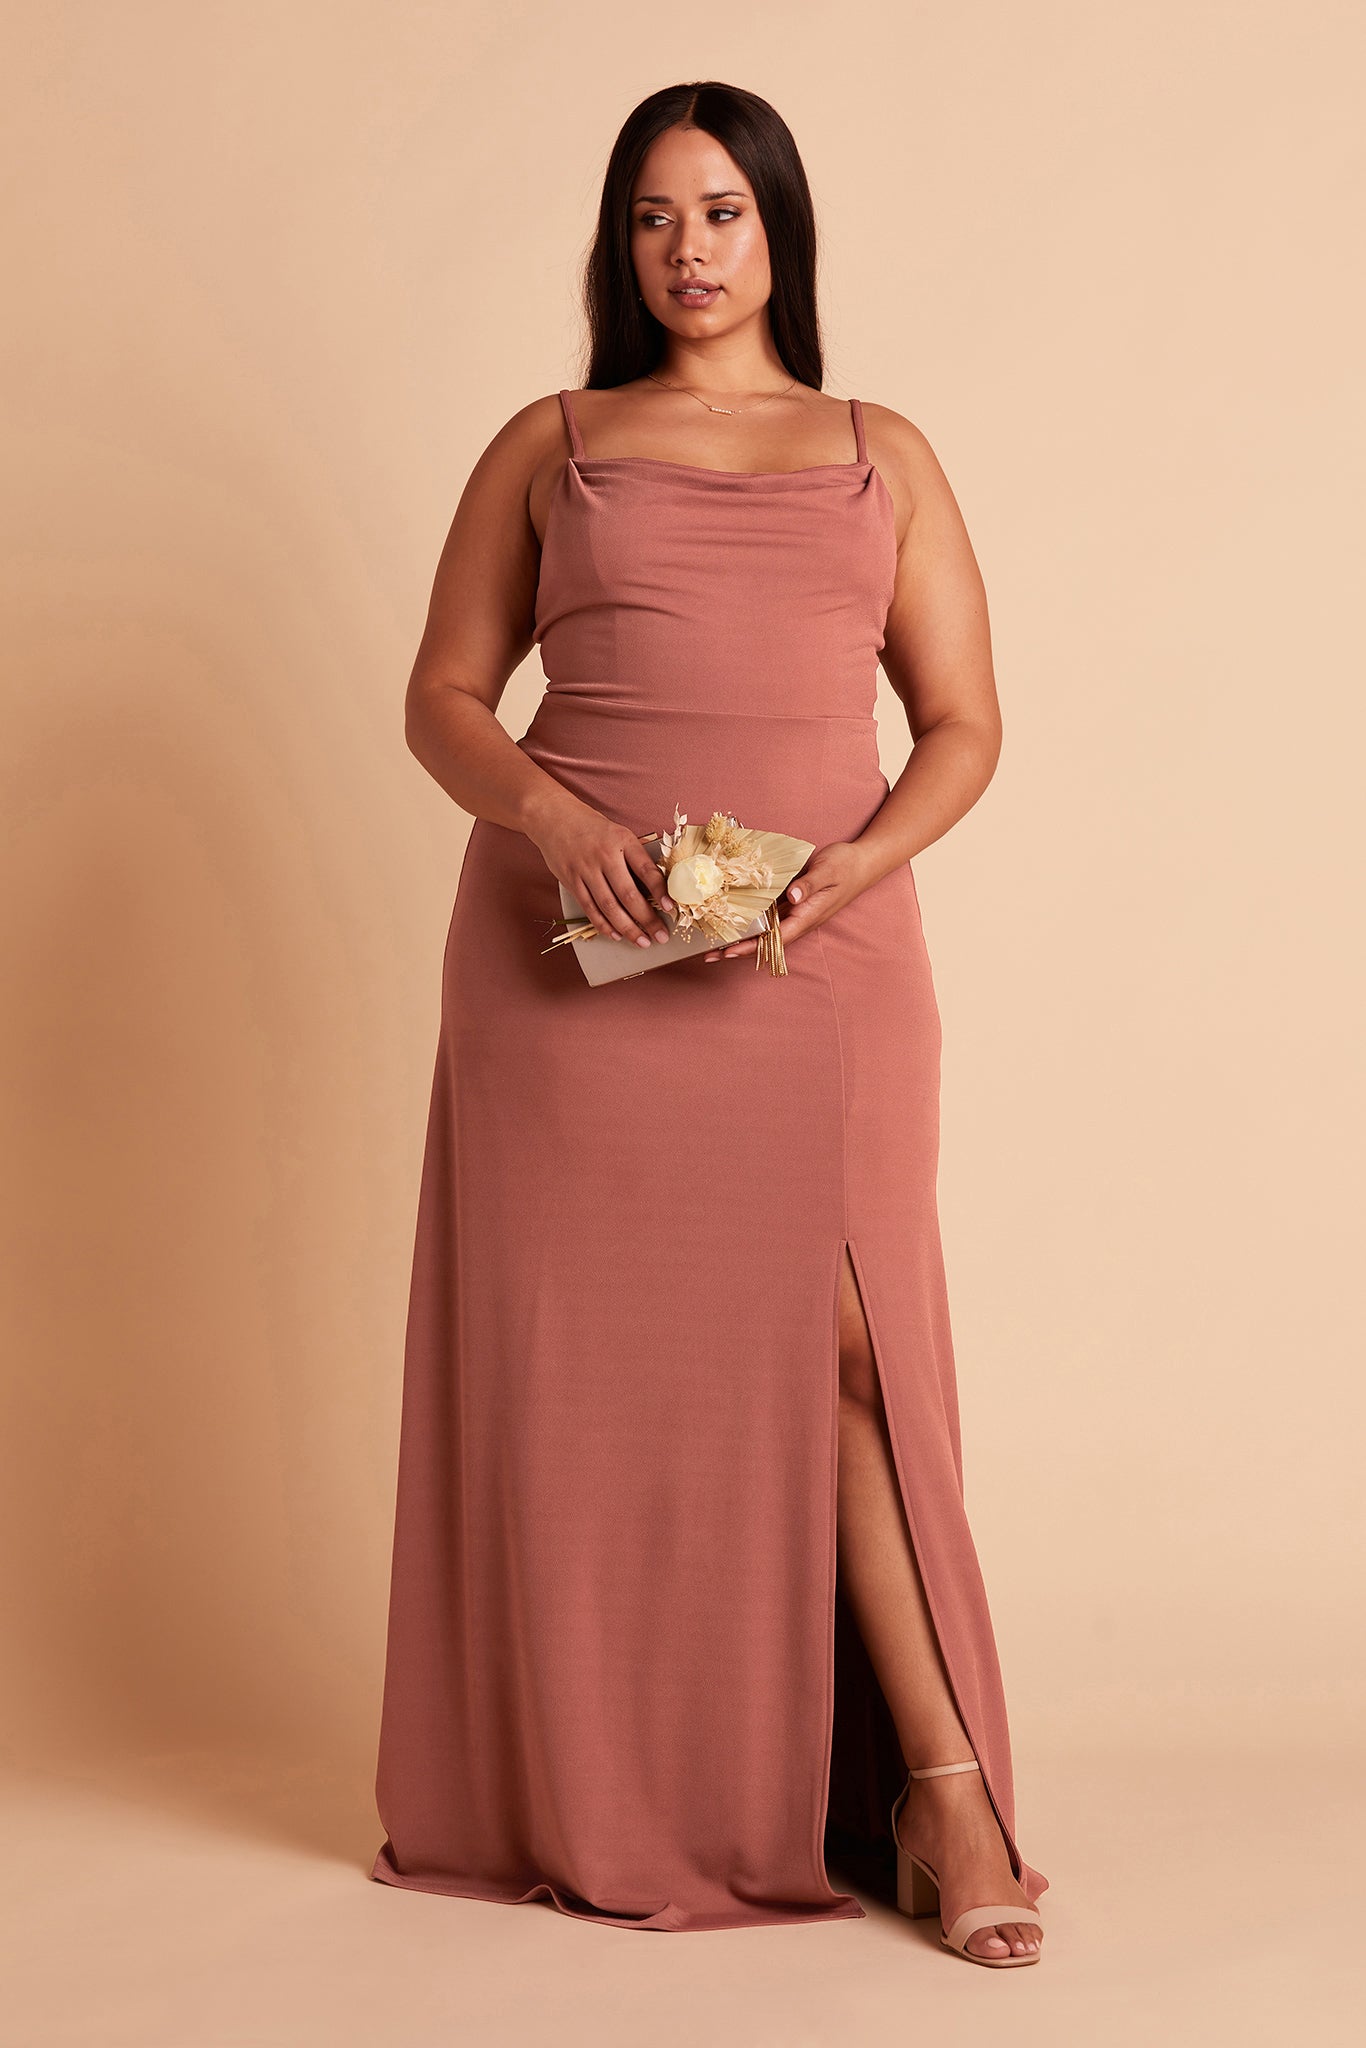 Ash plus size bridesmaid dress with slit in desert rose crepe by Birdy Grey, front view